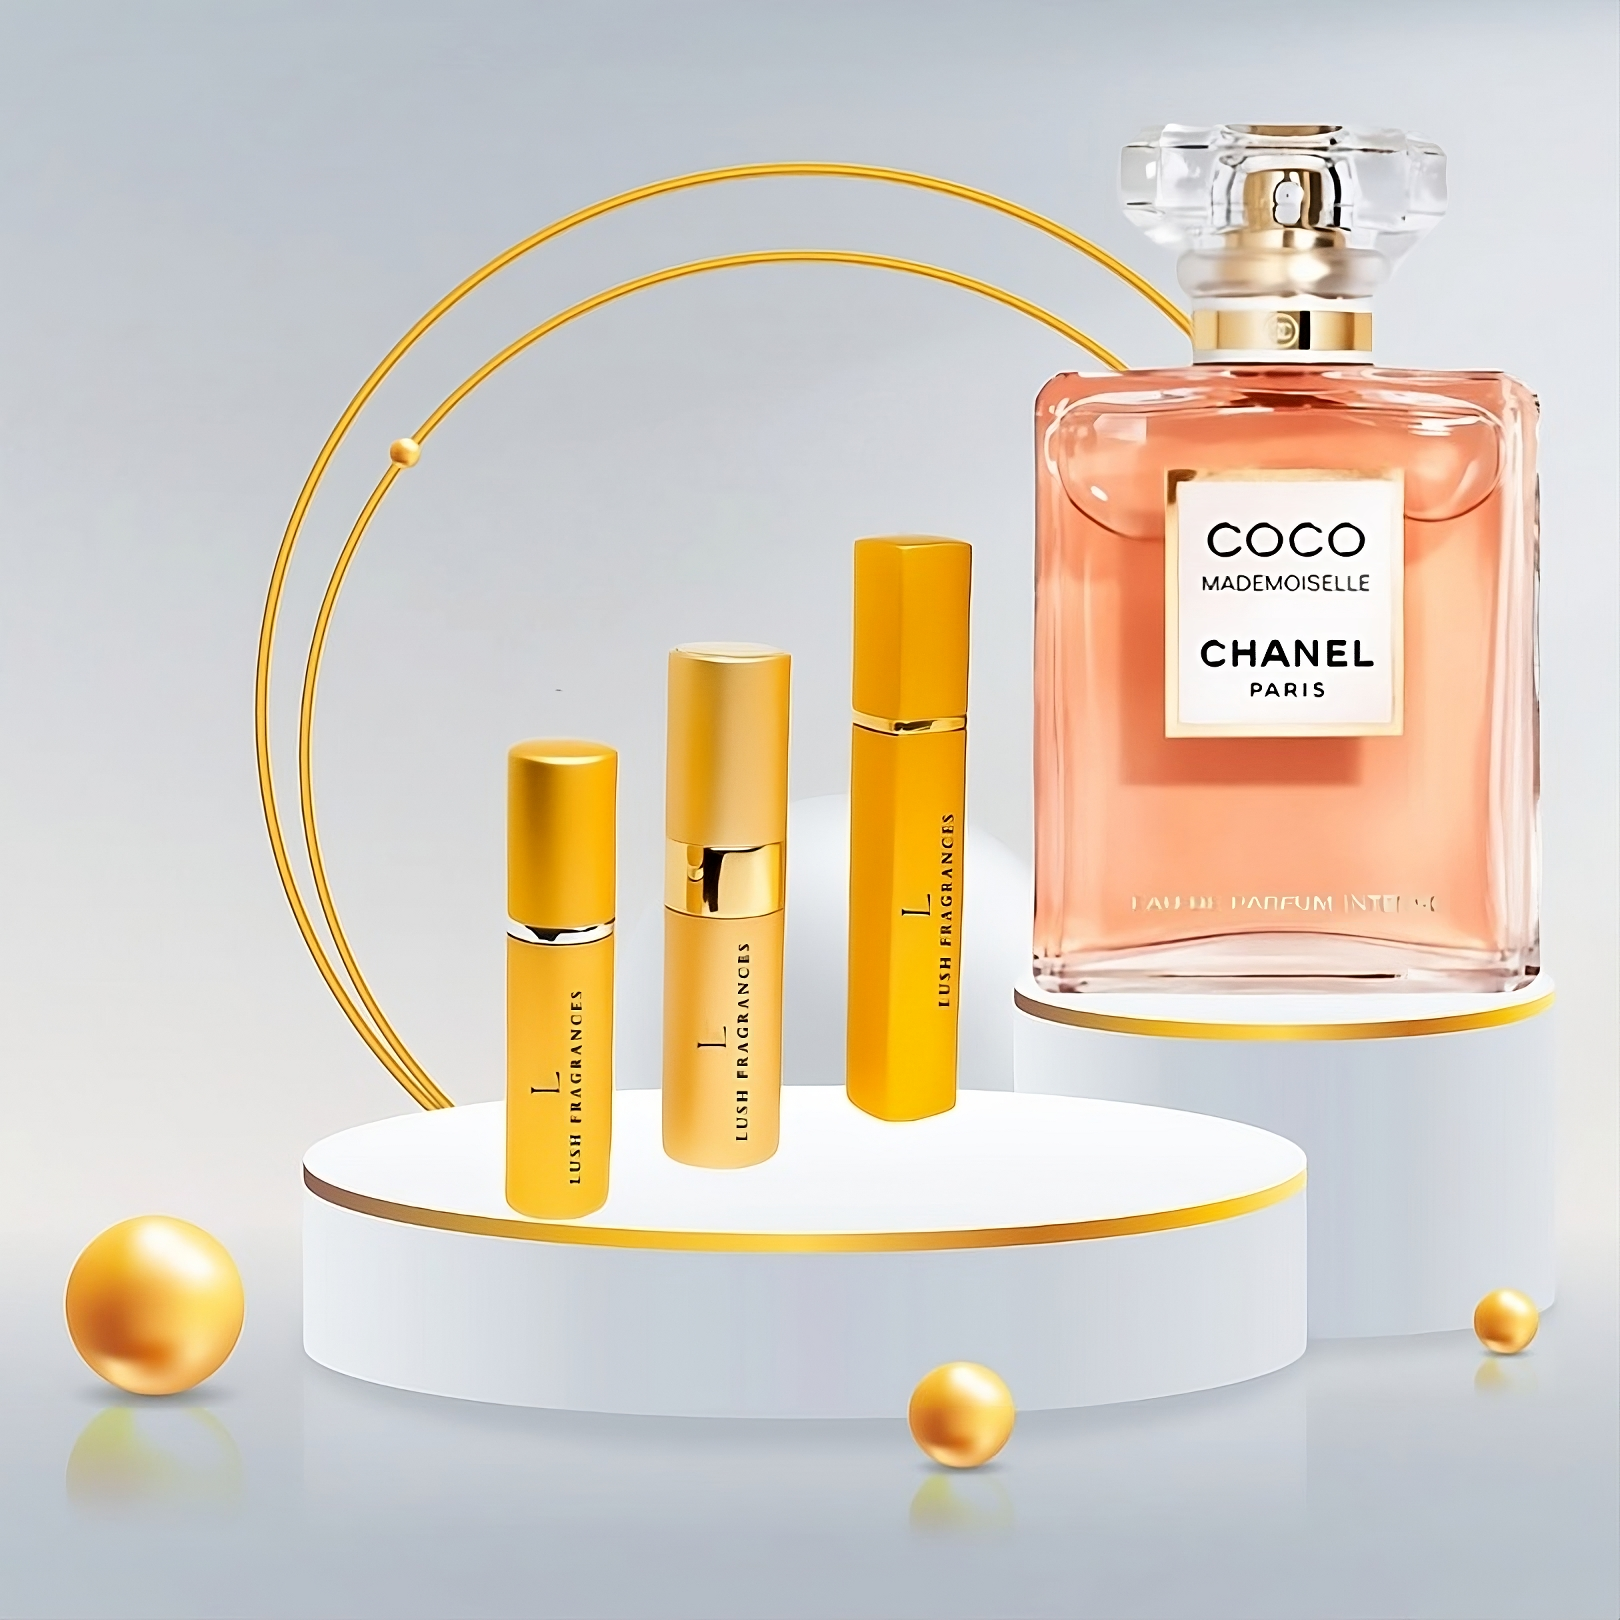 CHANEL - COCO MADEMOISELLE. Night and day. Discover on chanel.com